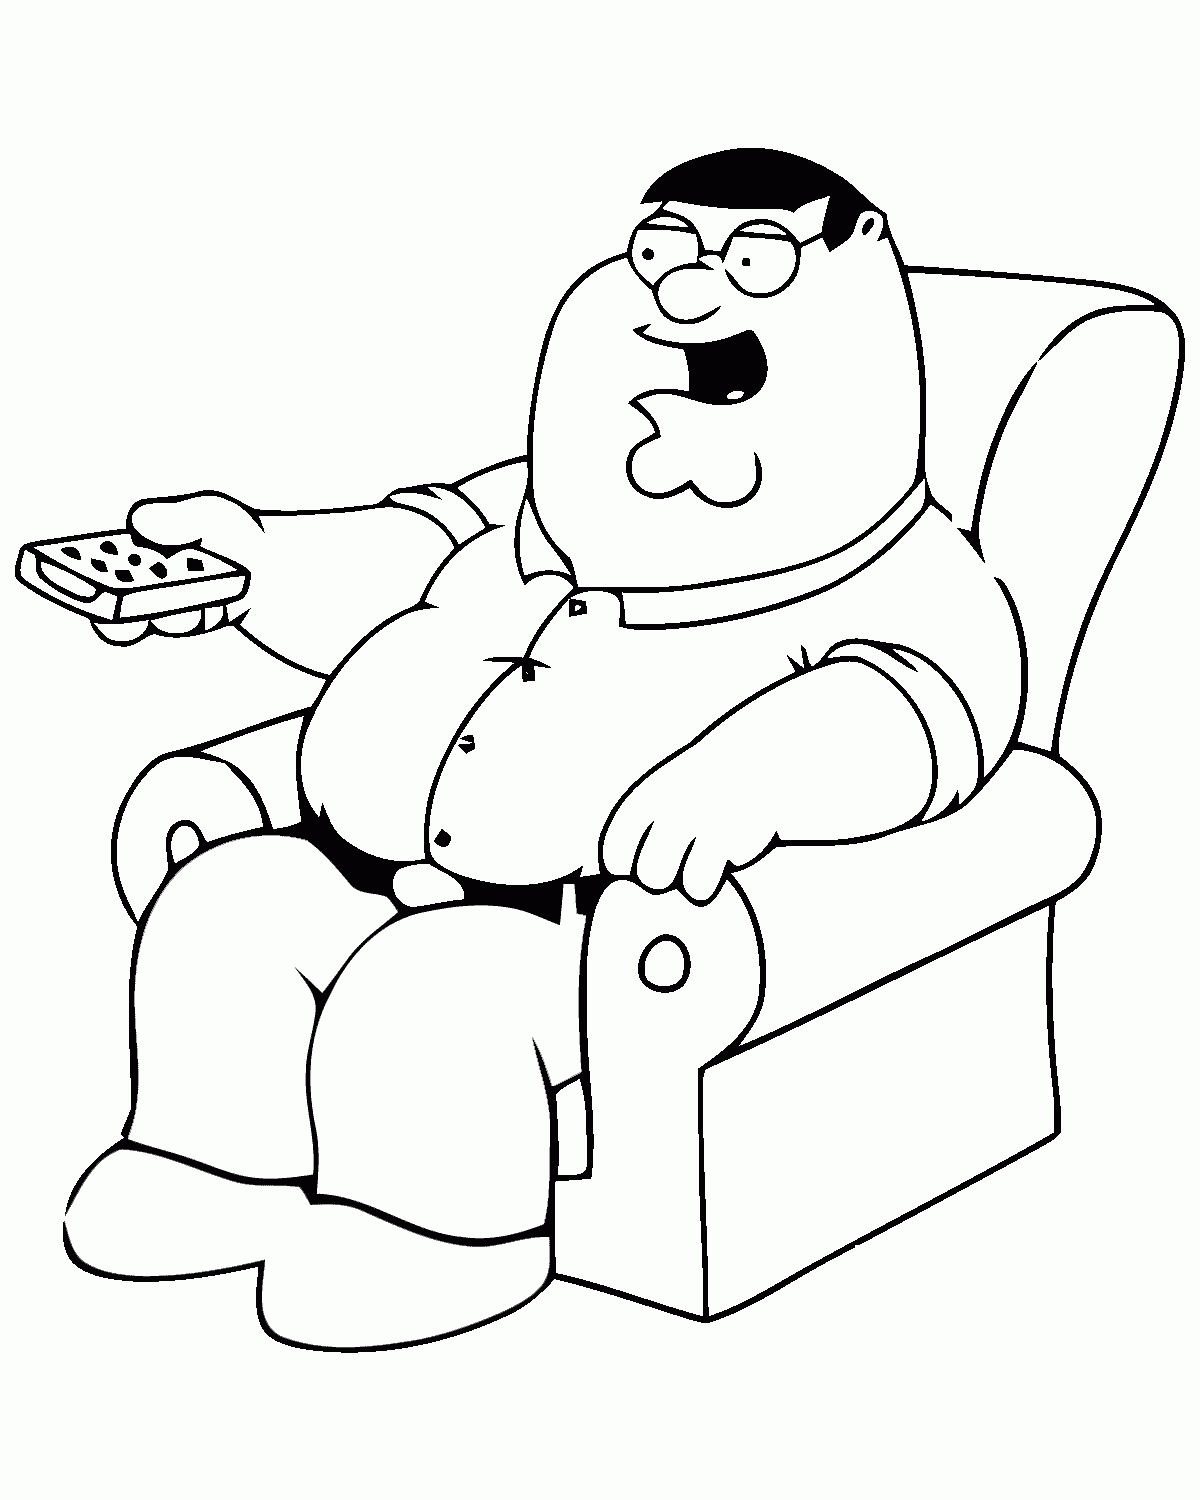 Related Family Guy Coloring Pages item-10341, Family Guy Coloring ...